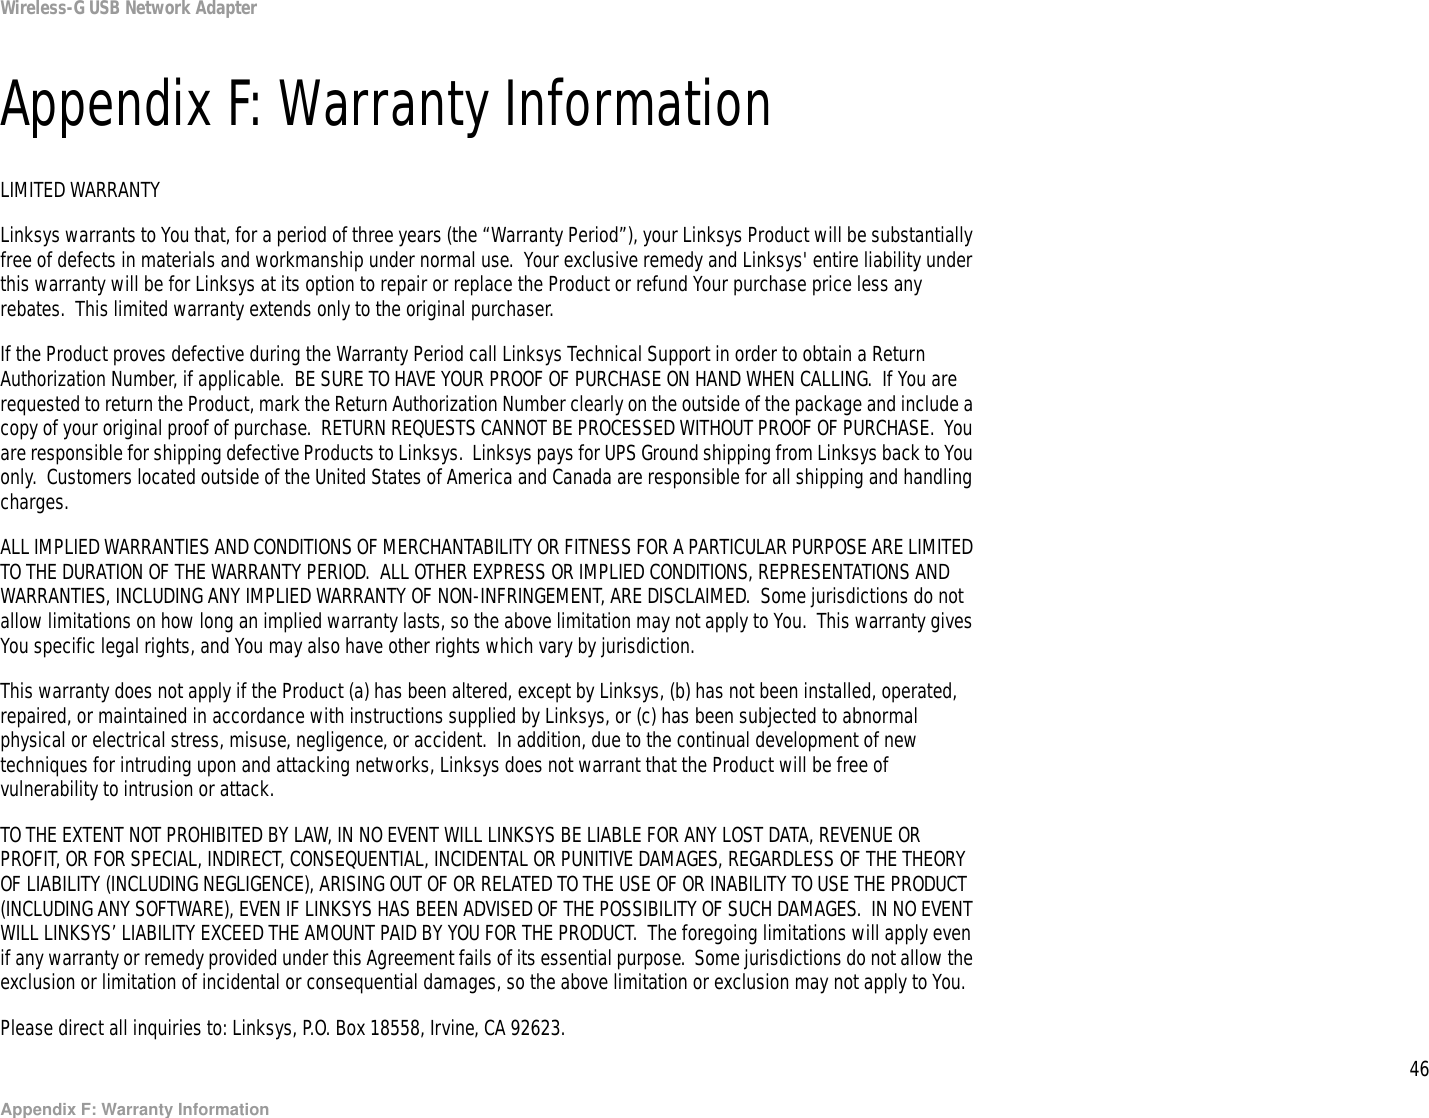 46Appendix F: Warranty InformationWireless-G USB Network AdapterAppendix F: Warranty InformationLIMITED WARRANTYLinksys warrants to You that, for a period of three years (the “Warranty Period”), your Linksys Product will be substantially free of defects in materials and workmanship under normal use.  Your exclusive remedy and Linksys&apos; entire liability under this warranty will be for Linksys at its option to repair or replace the Product or refund Your purchase price less any rebates.  This limited warranty extends only to the original purchaser.  If the Product proves defective during the Warranty Period call Linksys Technical Support in order to obtain a Return Authorization Number, if applicable.  BE SURE TO HAVE YOUR PROOF OF PURCHASE ON HAND WHEN CALLING.  If You are requested to return the Product, mark the Return Authorization Number clearly on the outside of the package and include a copy of your original proof of purchase.  RETURN REQUESTS CANNOT BE PROCESSED WITHOUT PROOF OF PURCHASE.  You are responsible for shipping defective Products to Linksys.  Linksys pays for UPS Ground shipping from Linksys back to You only.  Customers located outside of the United States of America and Canada are responsible for all shipping and handling charges. ALL IMPLIED WARRANTIES AND CONDITIONS OF MERCHANTABILITY OR FITNESS FOR A PARTICULAR PURPOSE ARE LIMITED TO THE DURATION OF THE WARRANTY PERIOD.  ALL OTHER EXPRESS OR IMPLIED CONDITIONS, REPRESENTATIONS AND WARRANTIES, INCLUDING ANY IMPLIED WARRANTY OF NON-INFRINGEMENT, ARE DISCLAIMED.  Some jurisdictions do not allow limitations on how long an implied warranty lasts, so the above limitation may not apply to You.  This warranty gives You specific legal rights, and You may also have other rights which vary by jurisdiction.This warranty does not apply if the Product (a) has been altered, except by Linksys, (b) has not been installed, operated, repaired, or maintained in accordance with instructions supplied by Linksys, or (c) has been subjected to abnormal physical or electrical stress, misuse, negligence, or accident.  In addition, due to the continual development of new techniques for intruding upon and attacking networks, Linksys does not warrant that the Product will be free of vulnerability to intrusion or attack.TO THE EXTENT NOT PROHIBITED BY LAW, IN NO EVENT WILL LINKSYS BE LIABLE FOR ANY LOST DATA, REVENUE OR PROFIT, OR FOR SPECIAL, INDIRECT, CONSEQUENTIAL, INCIDENTAL OR PUNITIVE DAMAGES, REGARDLESS OF THE THEORY OF LIABILITY (INCLUDING NEGLIGENCE), ARISING OUT OF OR RELATED TO THE USE OF OR INABILITY TO USE THE PRODUCT (INCLUDING ANY SOFTWARE), EVEN IF LINKSYS HAS BEEN ADVISED OF THE POSSIBILITY OF SUCH DAMAGES.  IN NO EVENT WILL LINKSYS’ LIABILITY EXCEED THE AMOUNT PAID BY YOU FOR THE PRODUCT.  The foregoing limitations will apply even if any warranty or remedy provided under this Agreement fails of its essential purpose.  Some jurisdictions do not allow the exclusion or limitation of incidental or consequential damages, so the above limitation or exclusion may not apply to You.Please direct all inquiries to: Linksys, P.O. Box 18558, Irvine, CA 92623.